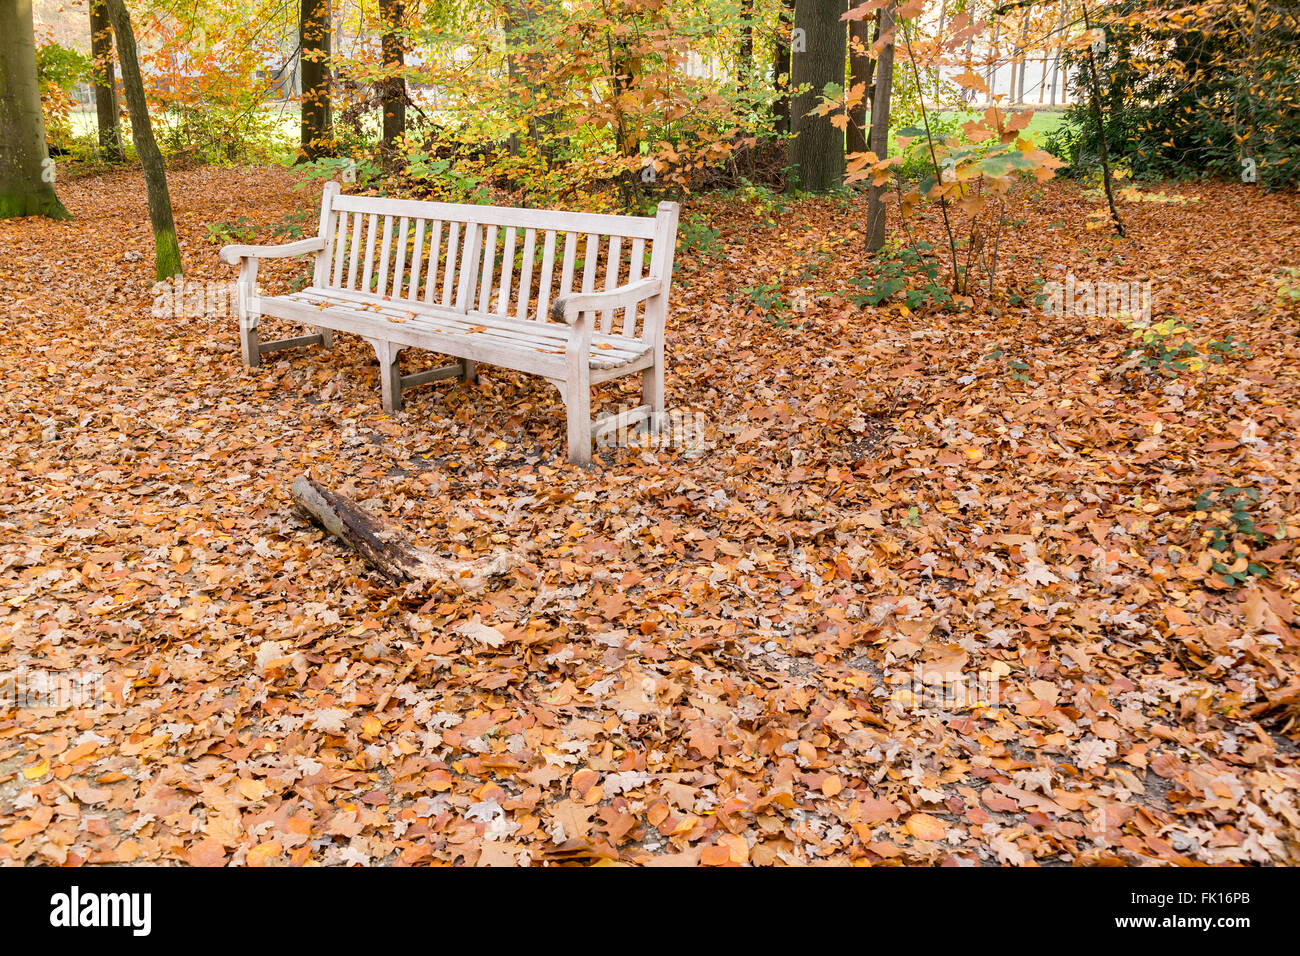 Wooden bench surrounded by many old fallen leaves in woods in autumn, Netherlands Stock Photo